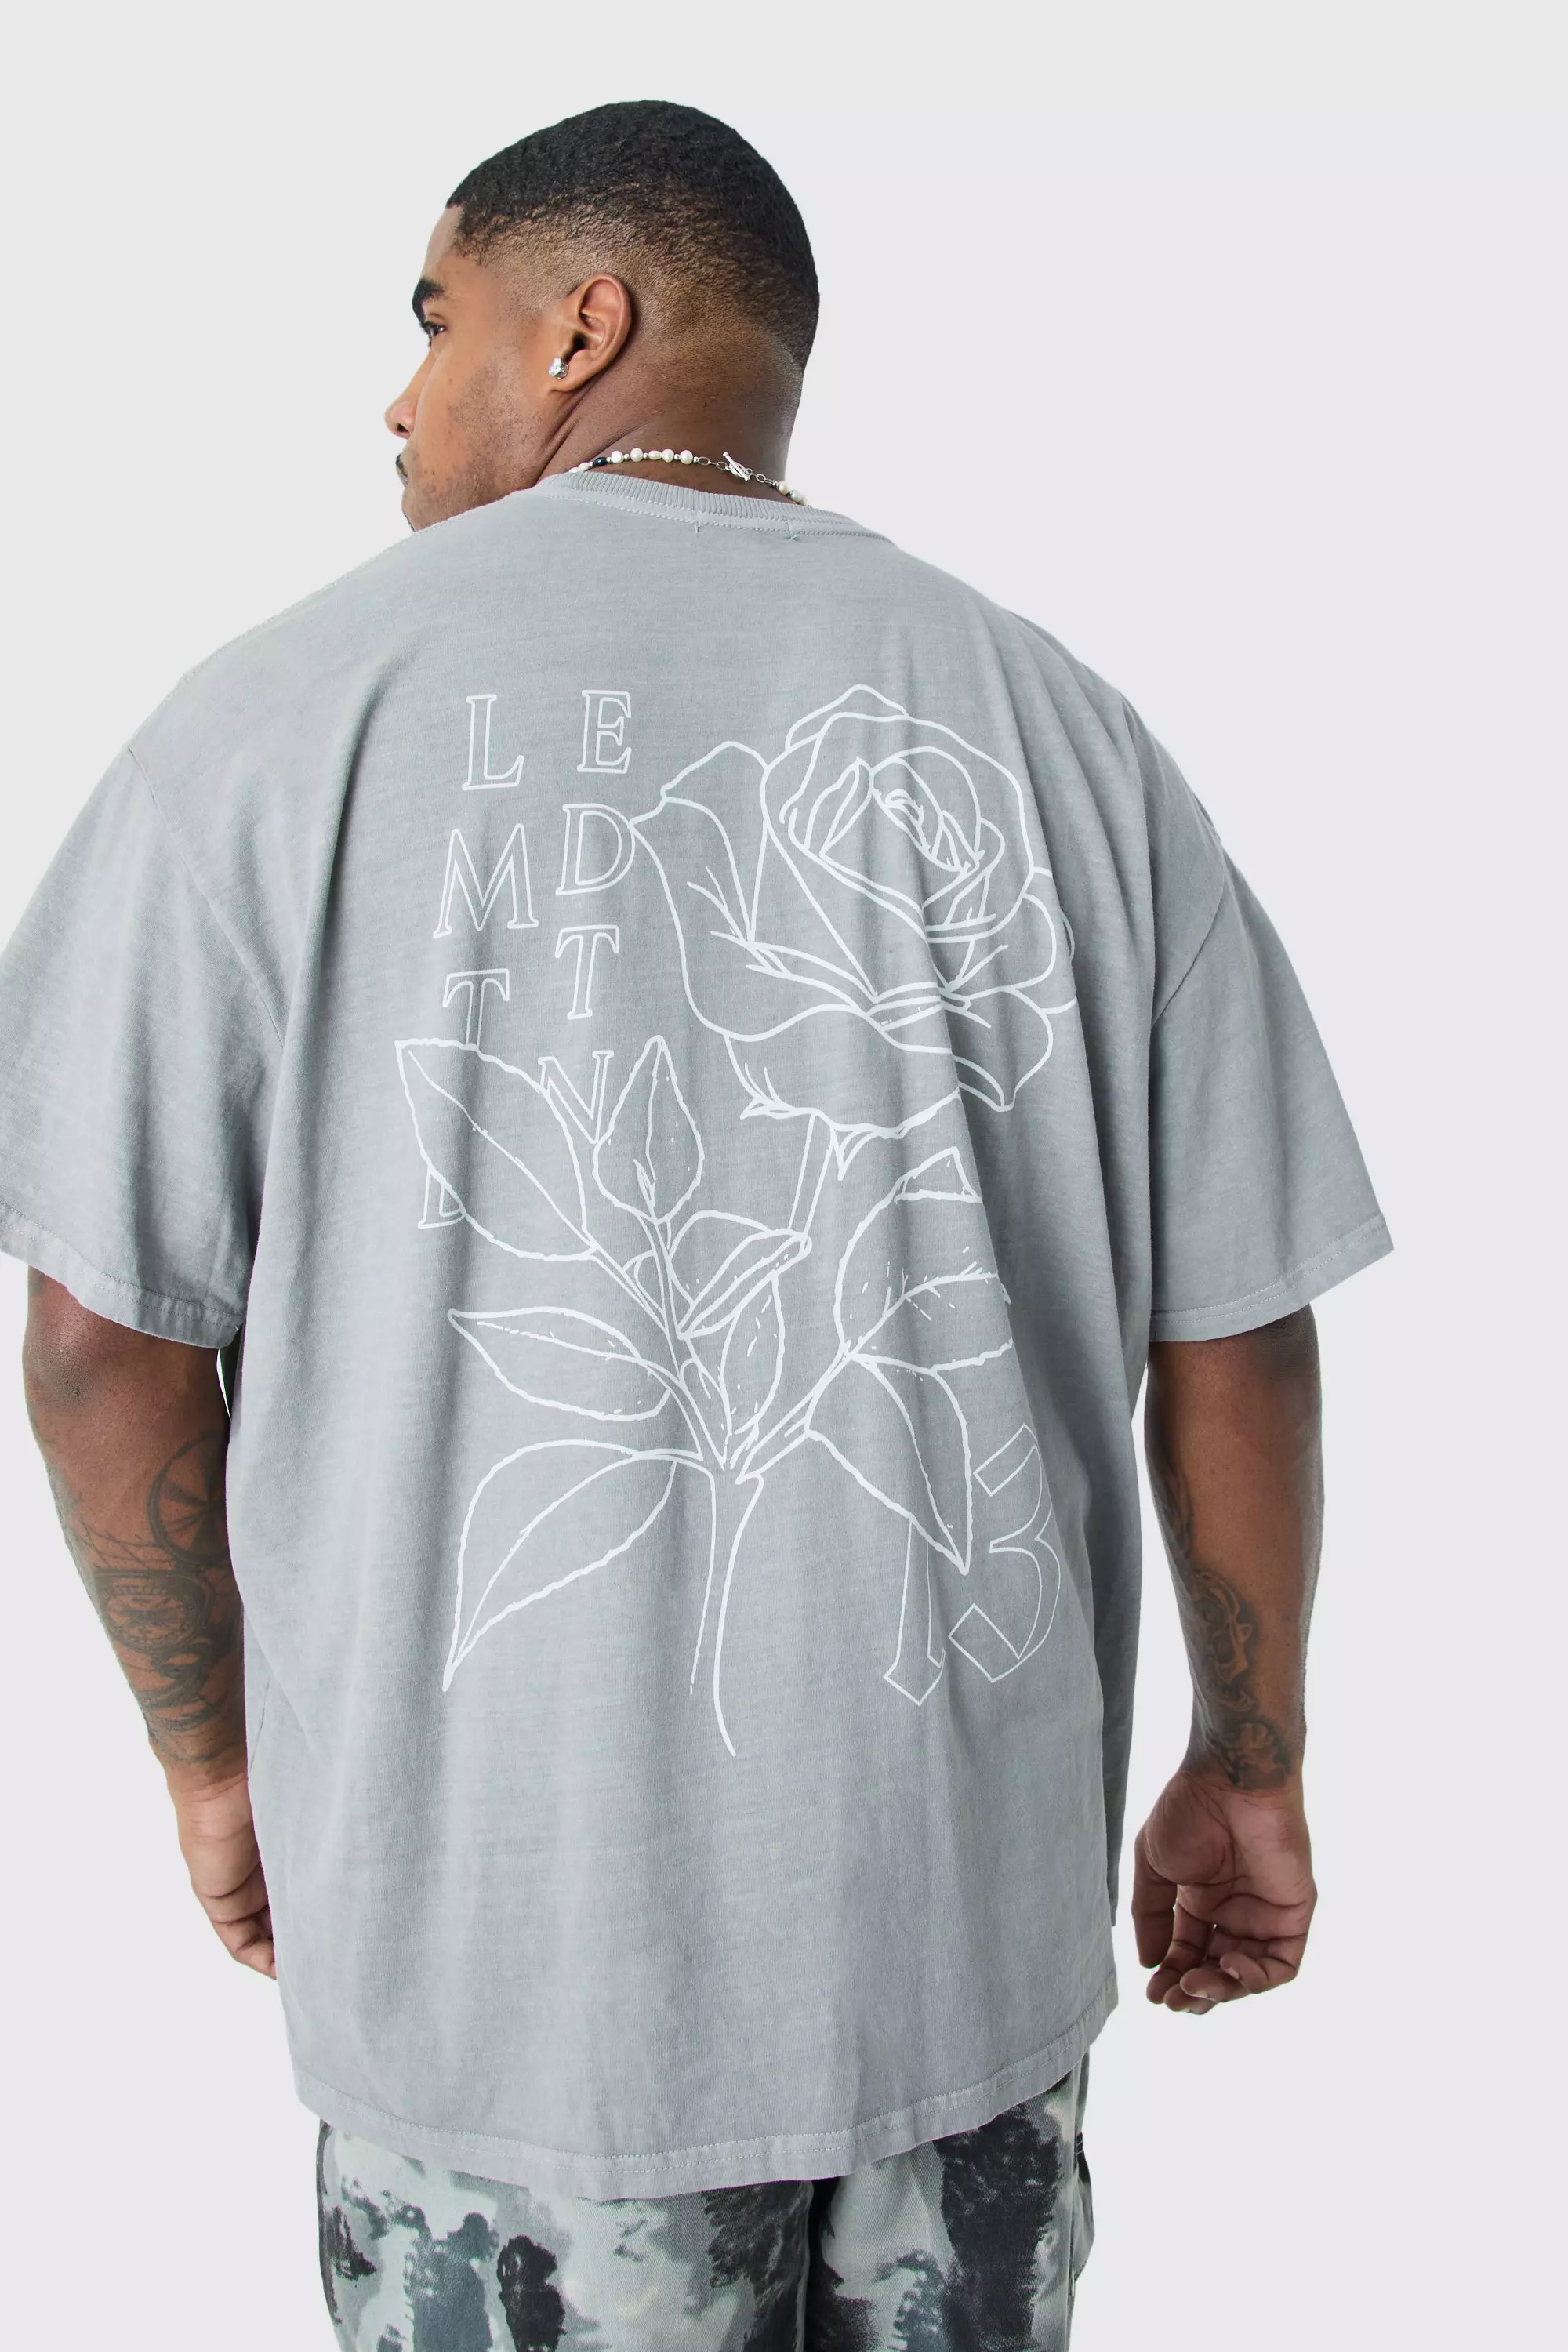 Plus Oversized Overdyed Floral Stencil Graphic T-shirt slate grey